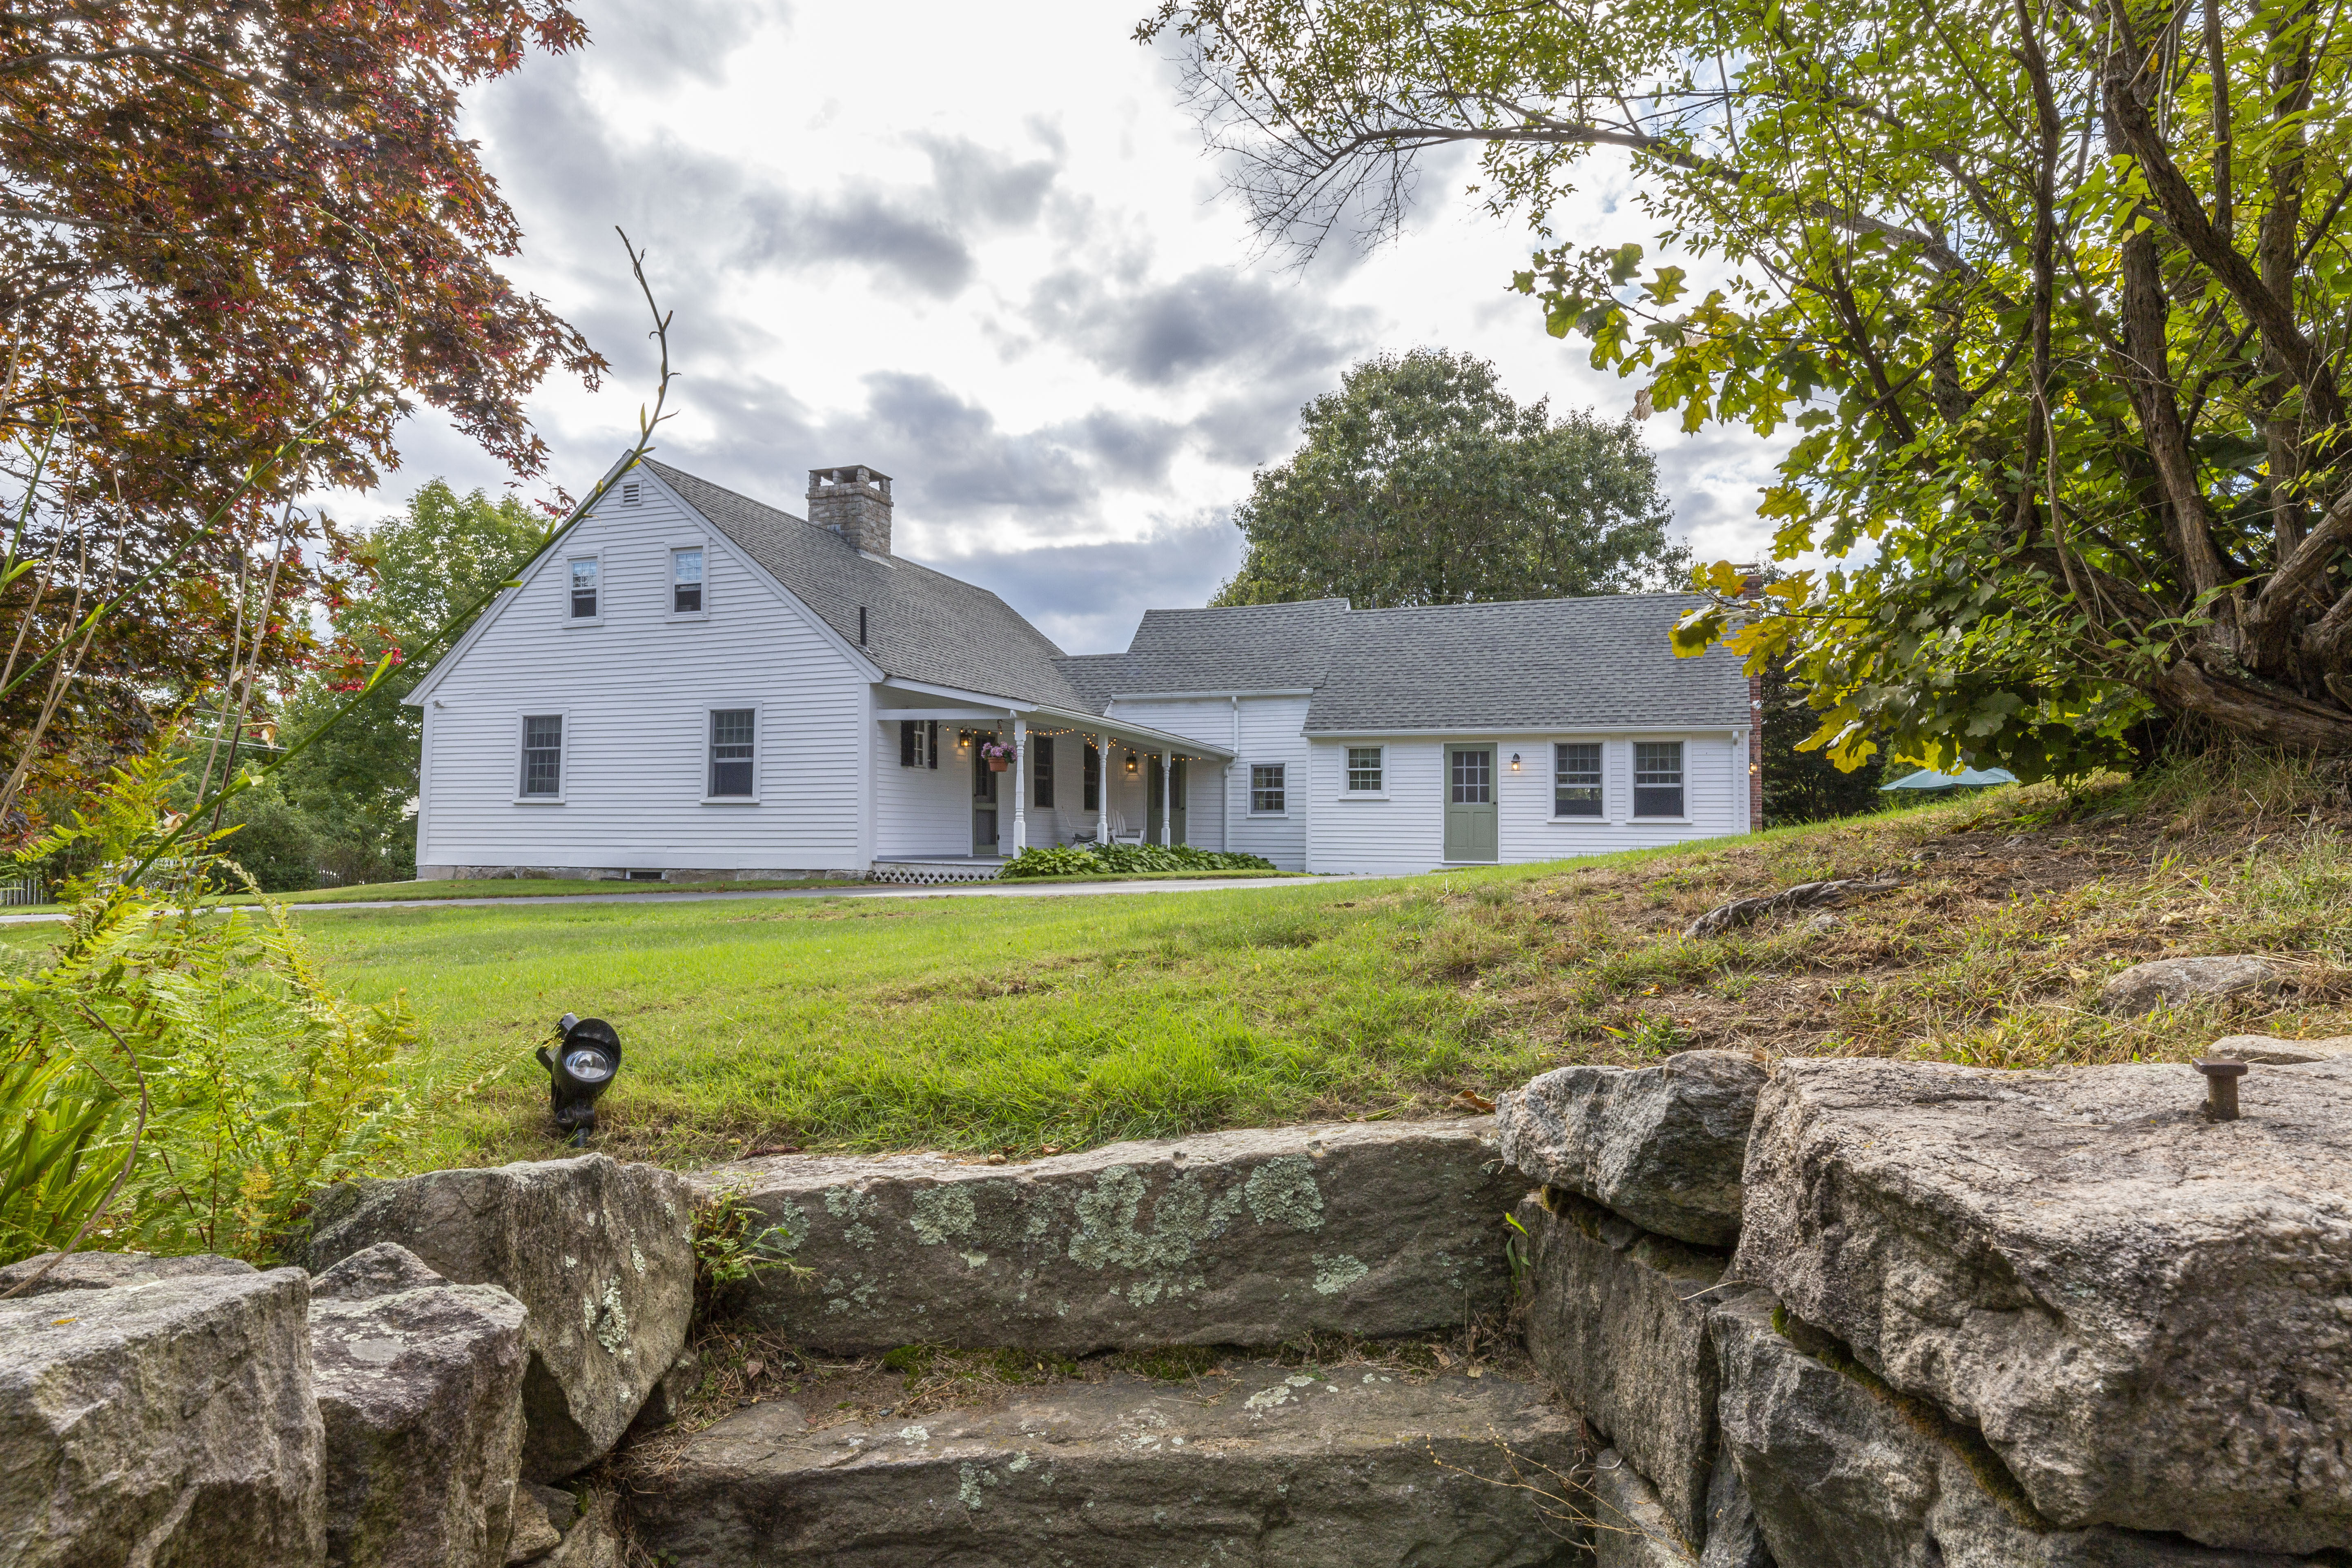 House Lust: A Picture-Perfect Farmhouse With Four Outbuildings